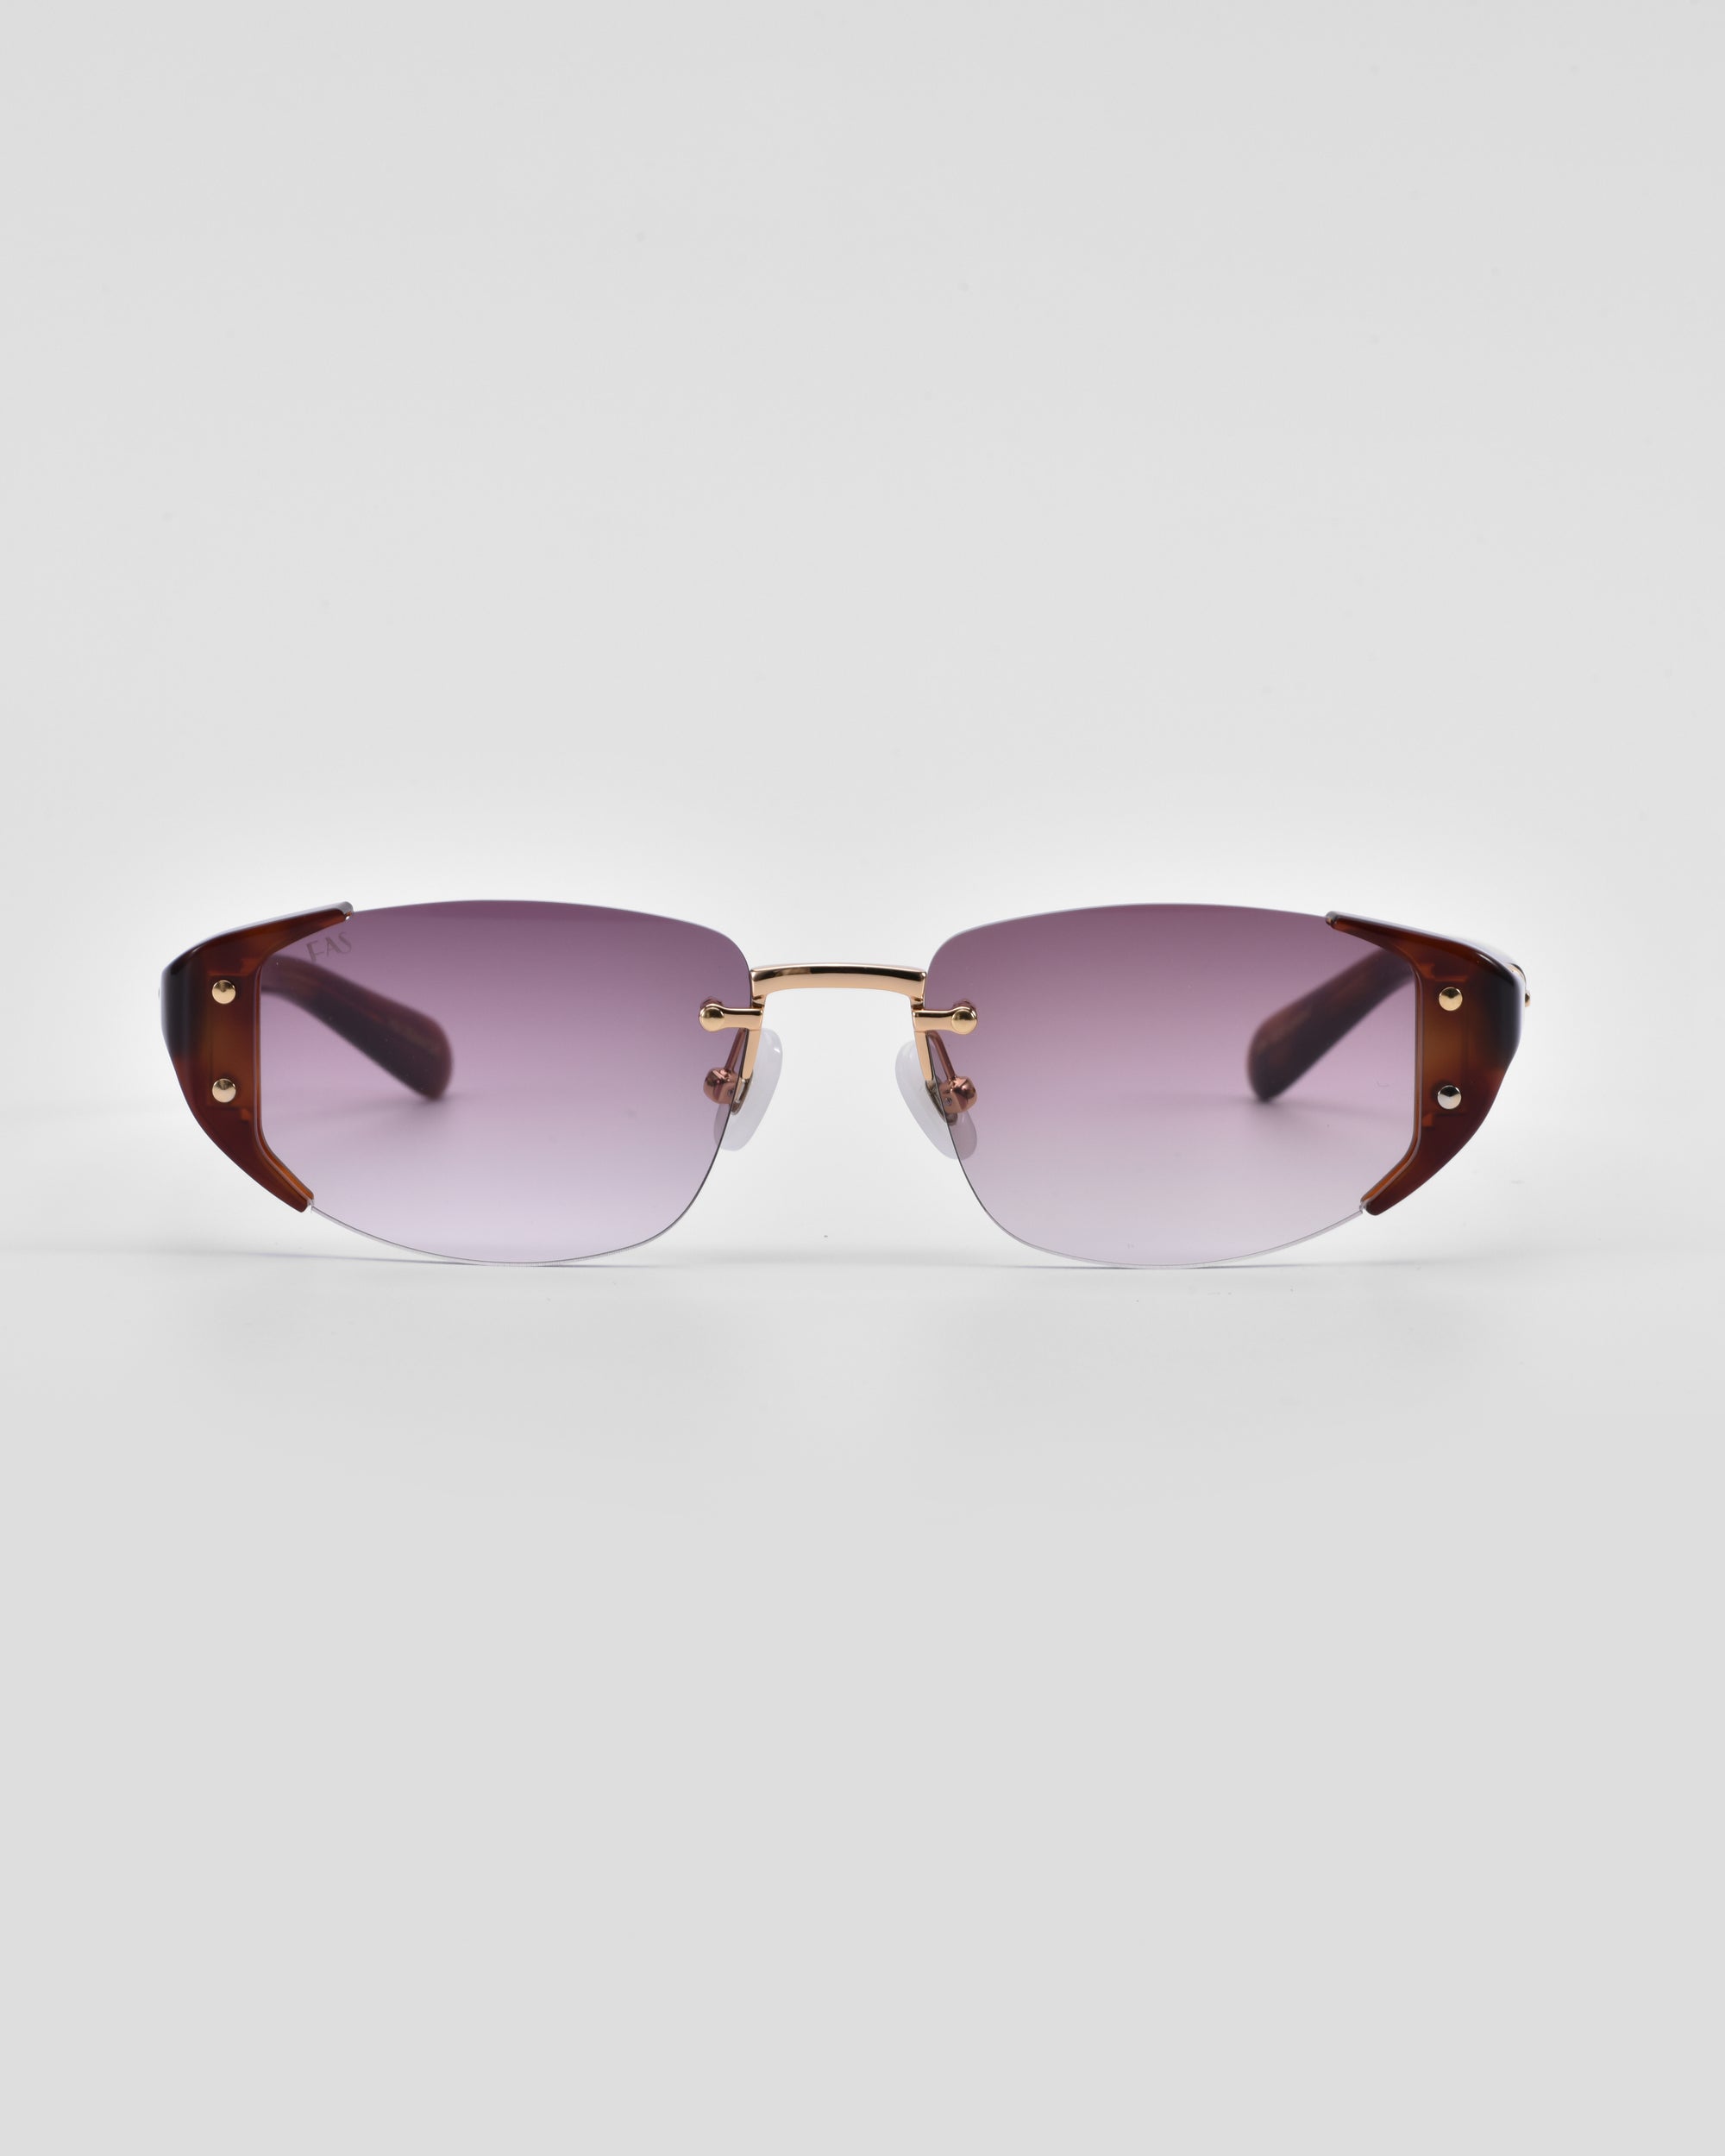 A pair of Harbour sunglasses with semi-rimless, rectangular, purple-tinted lenses by For Art&#39;s Sake®. Featuring brown, wide temples with metallic accents and a thin, 18 karat gold-plated bridge, the retro-inspired design stands out against a plain white background.